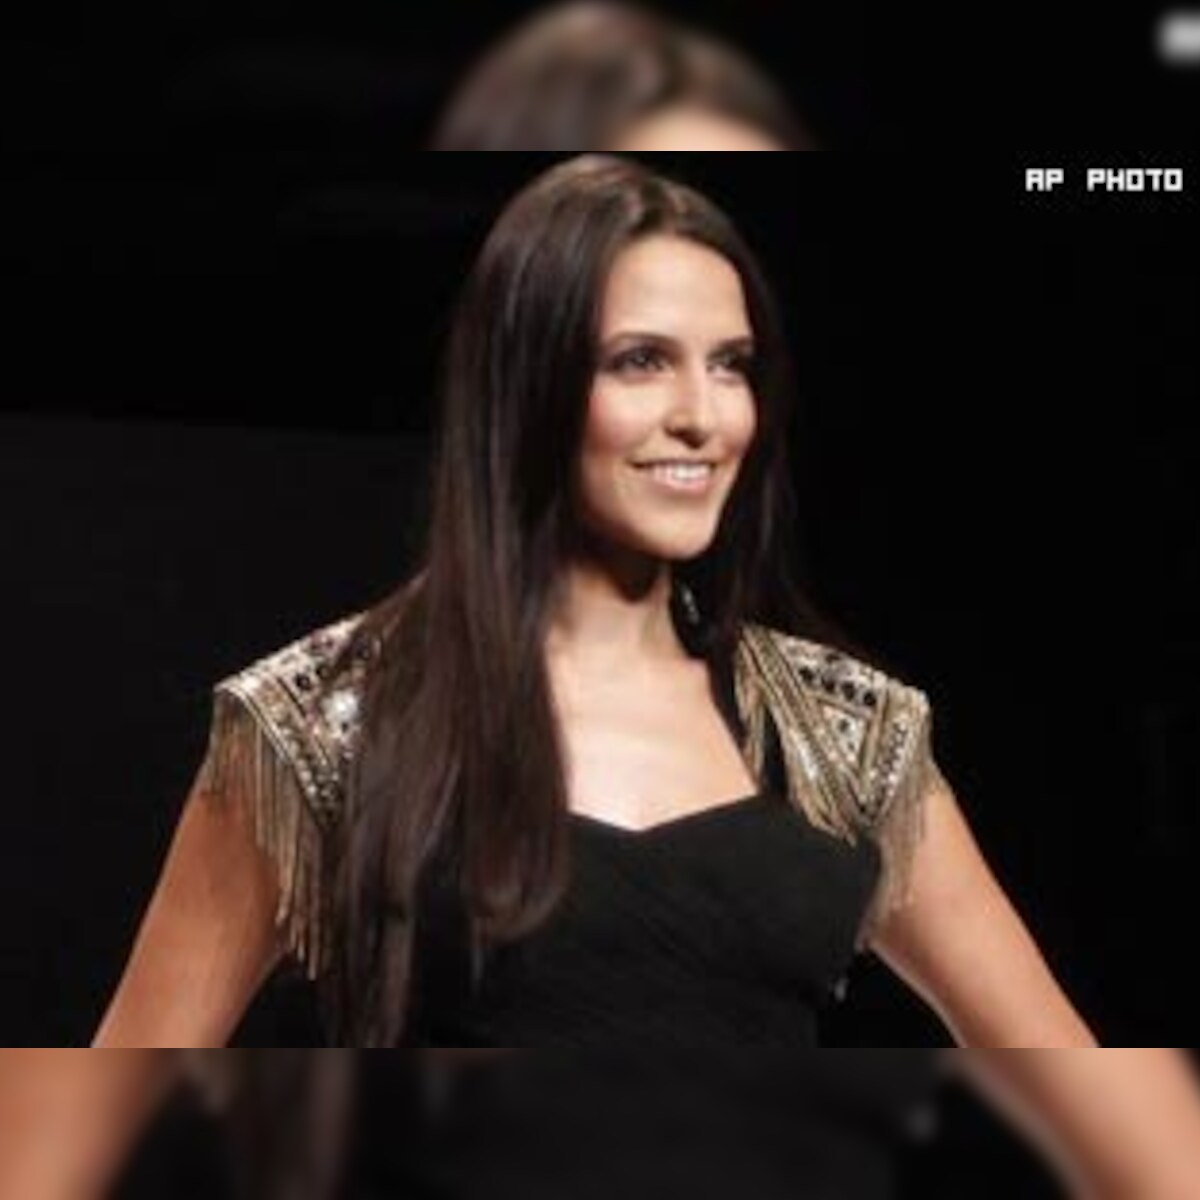 My biggest flaw is that I am sexy, says Neha Dhupia